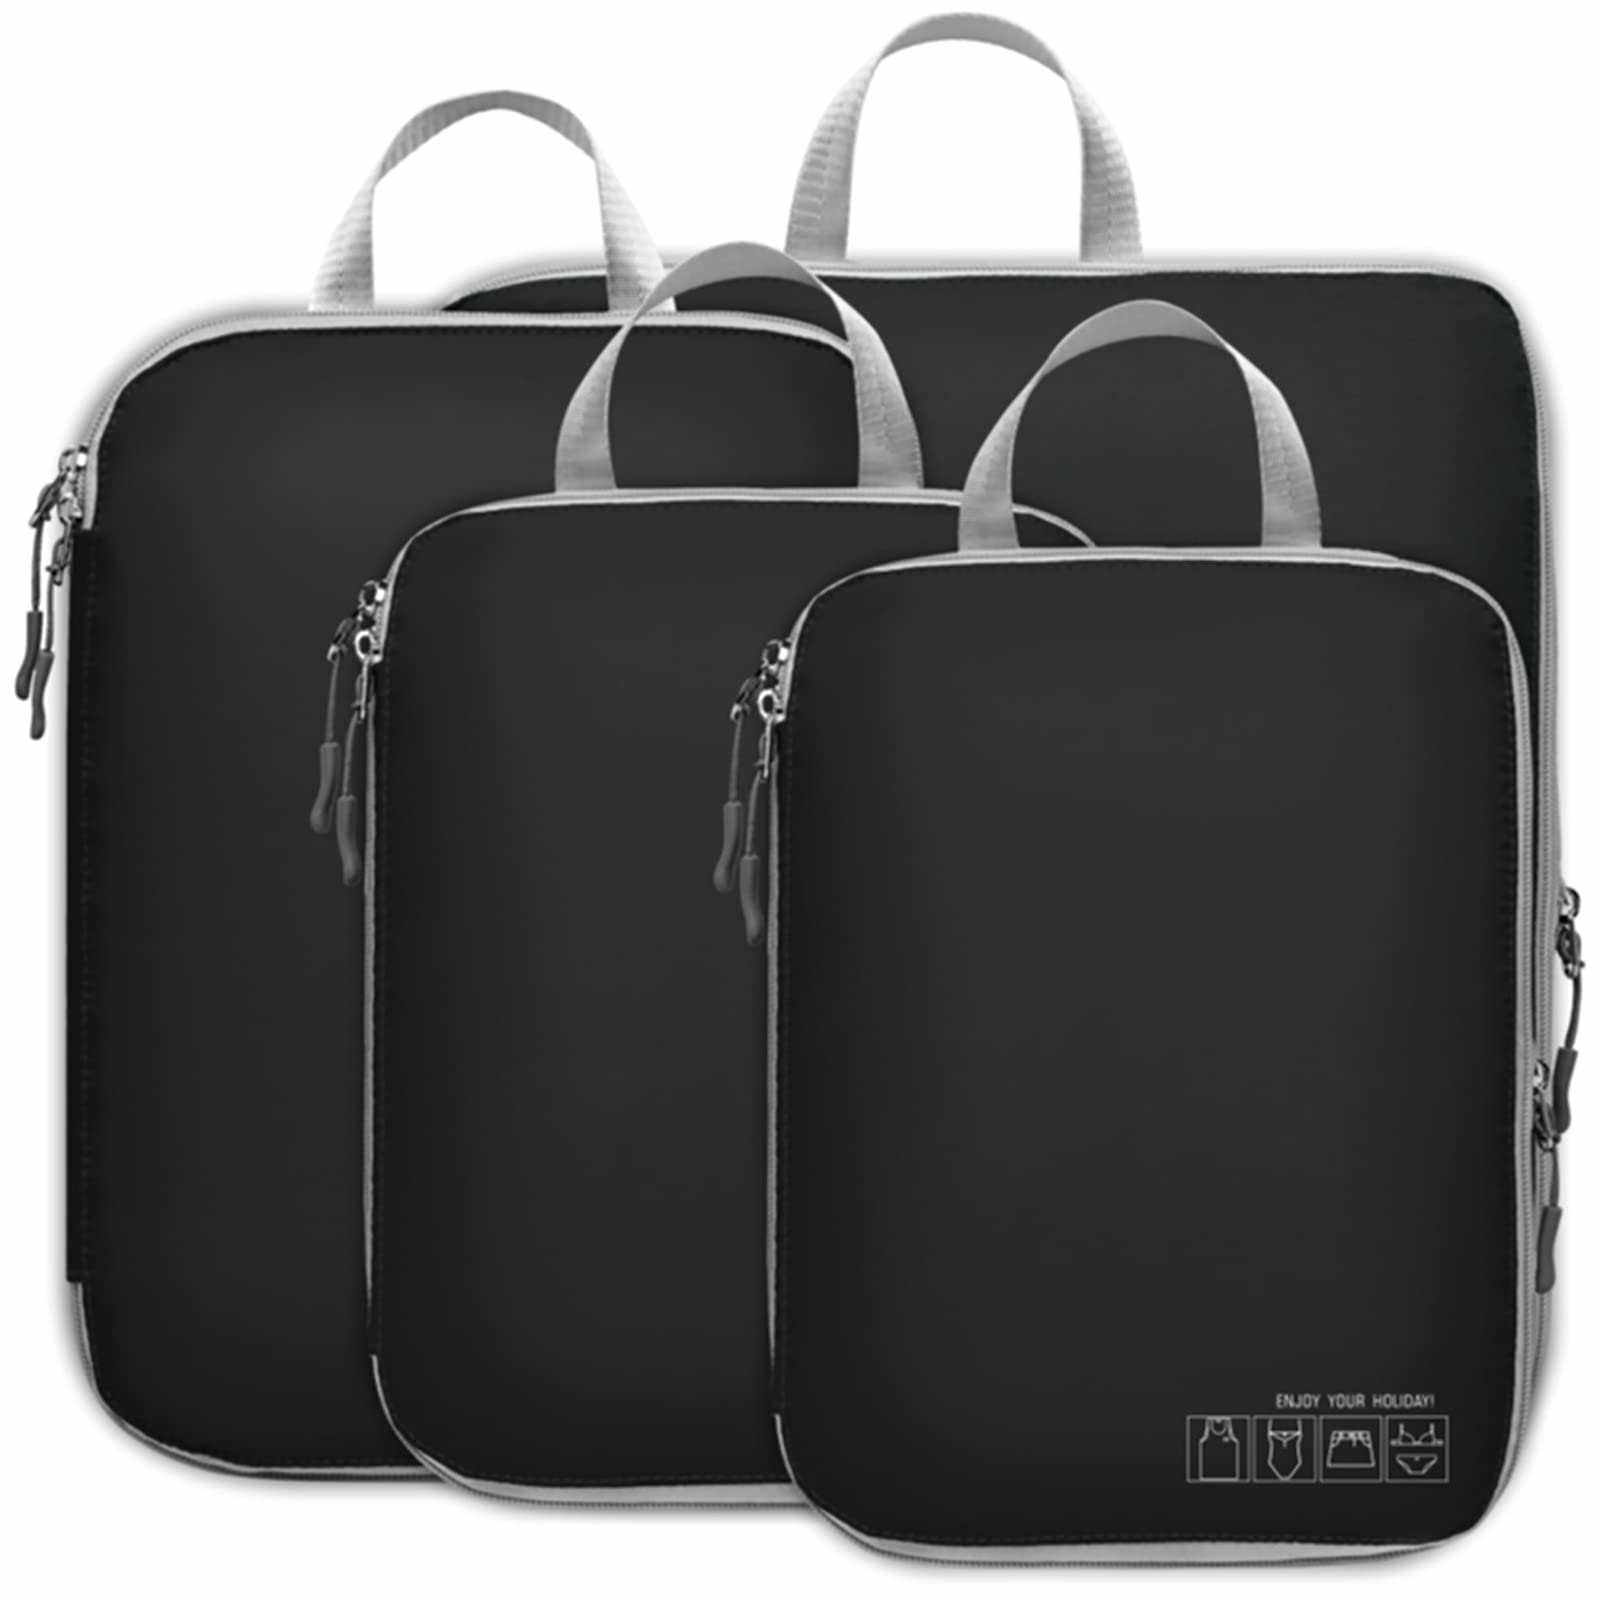 4 Pack Packing Cubes for Travel Bag Product Details